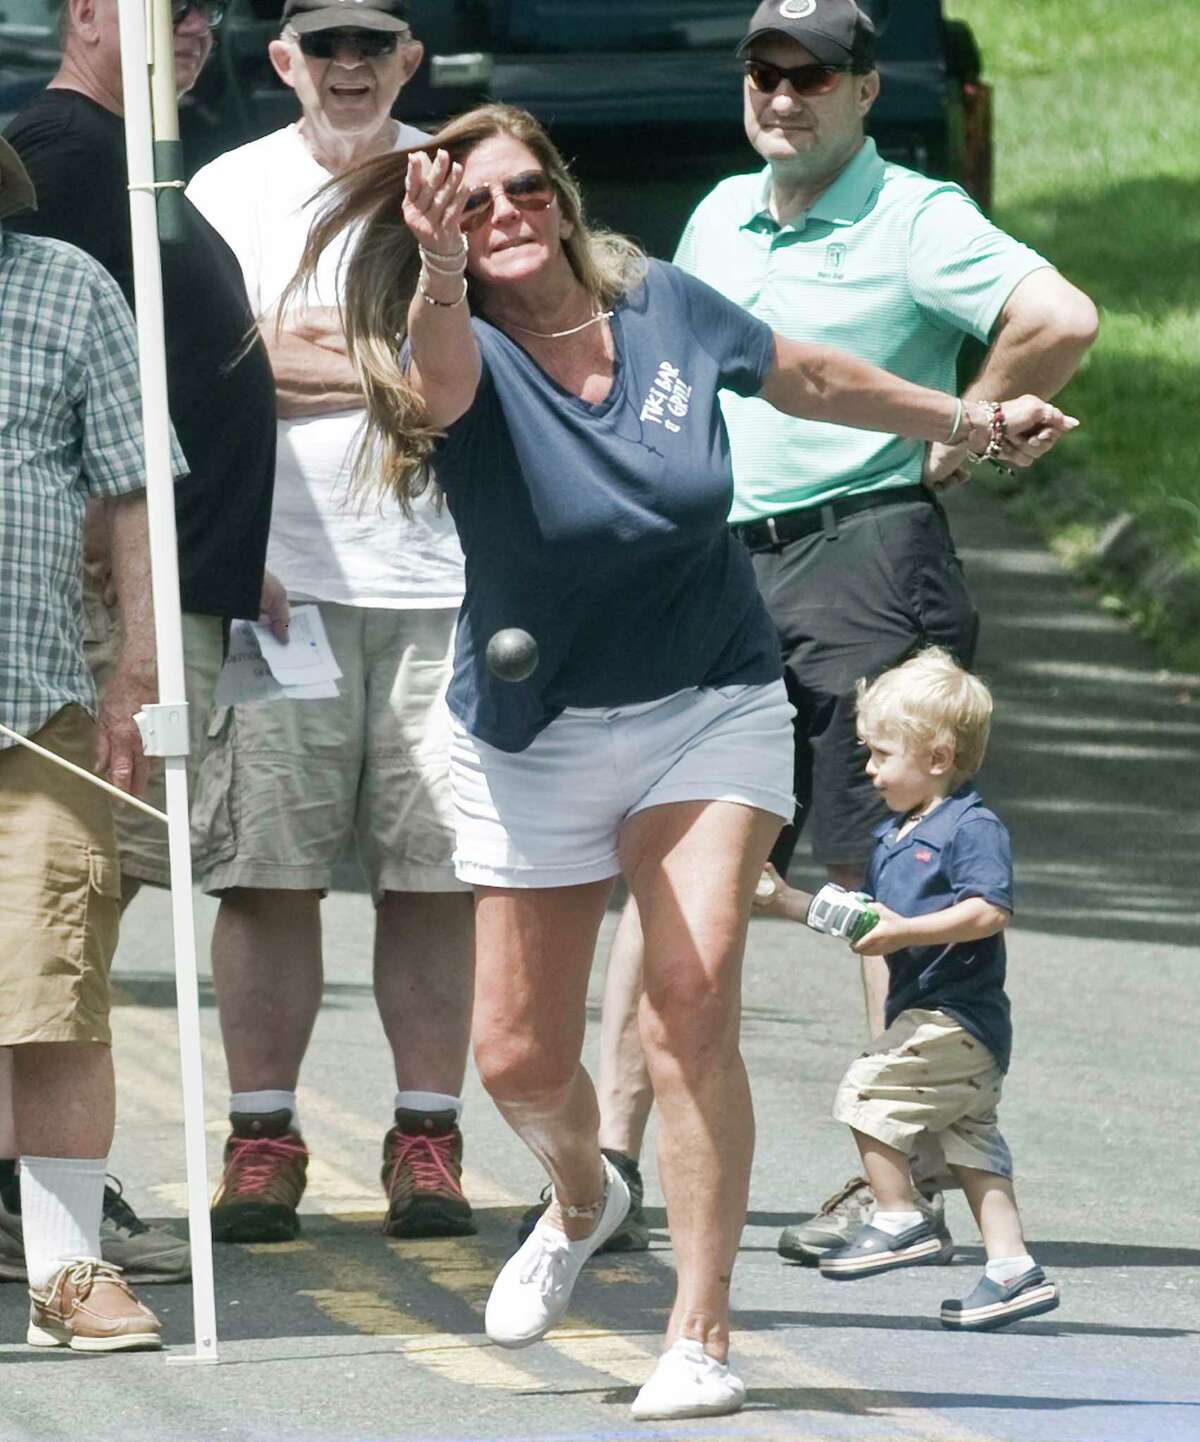 Cathy Loudon, of Sandy Hook, delivers the ball during a game of Irish road bowling.